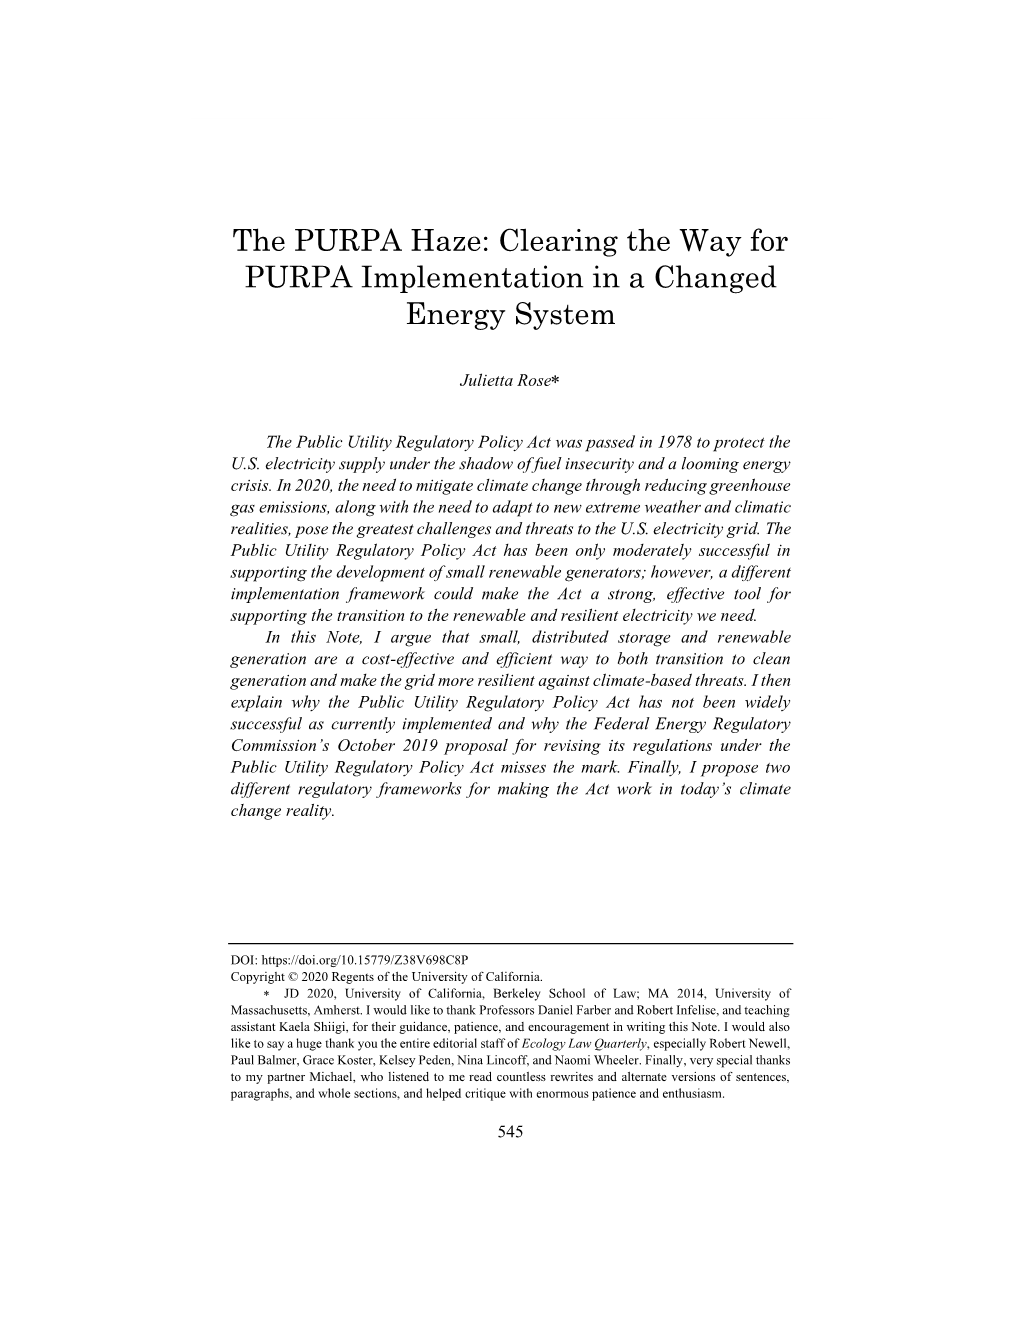 The PURPA Haze: Clearing the Way for PURPA Implementation in a Changed Energy System